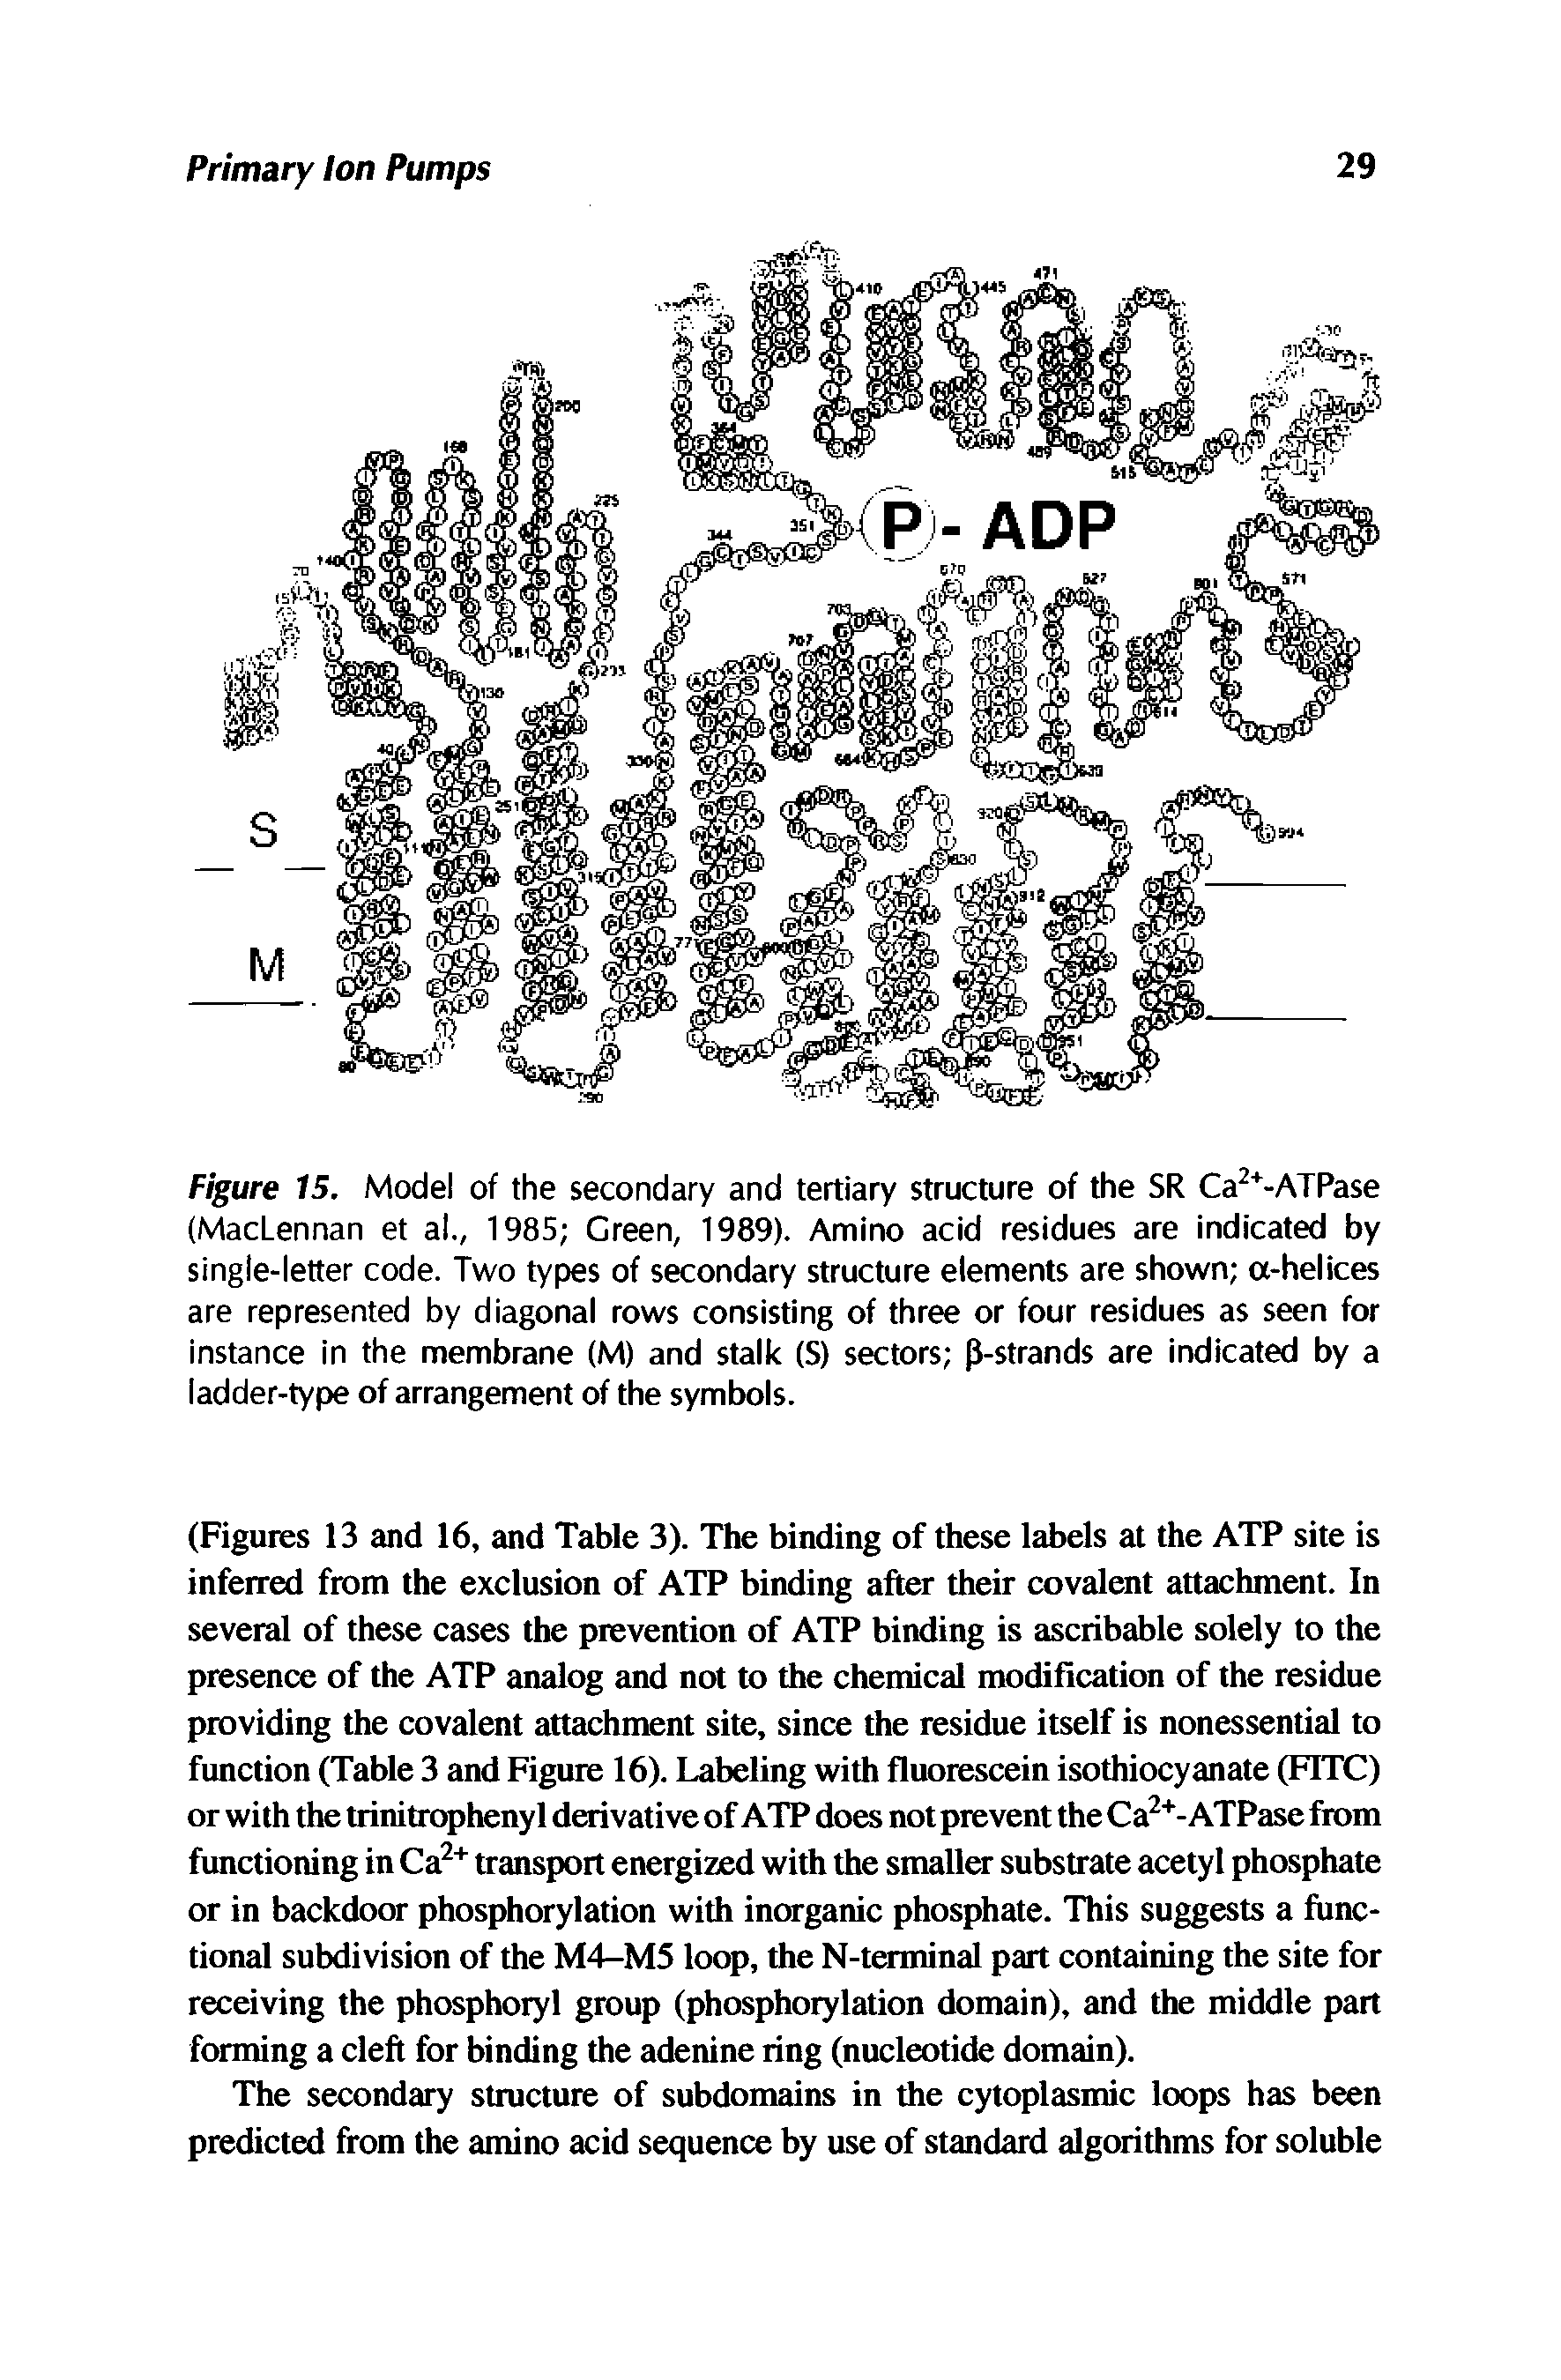 Figure 15. Model of the secondary and tertiary structure of the SR Ca2+-ATPase (MacLennan et al., 1985 Green, 1989). Amino acid residues are indicated by single-letter code. Two types of secondary structure elements are shown a-helices are represented by diagonal rows consisting of three or four residues as seen for instance in the membrane (M) and stalk (S) sectors P-strands are indicated by a ladder-type of arrangement of the symbols.